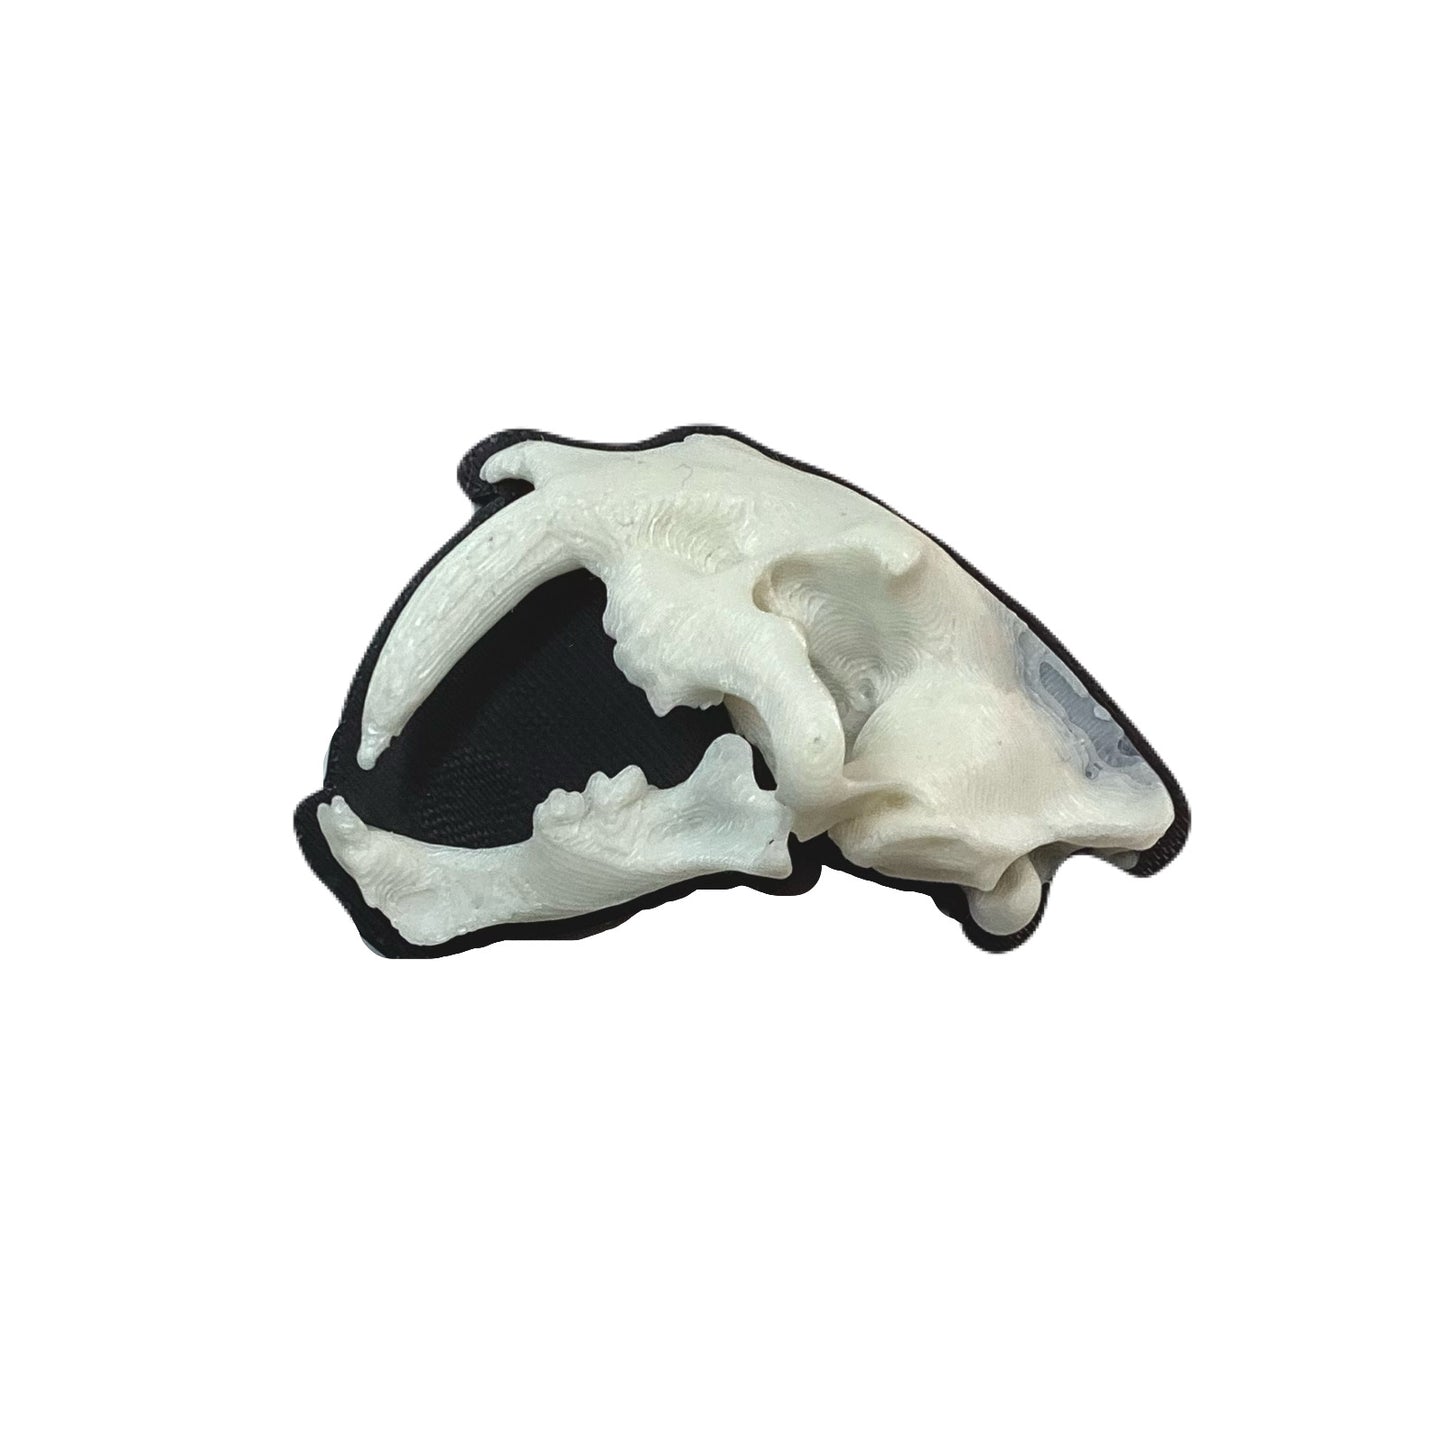 Ice age animal skull refrigerator magnets (woolly mammoth, saber tooth tiger, Neanderthal)